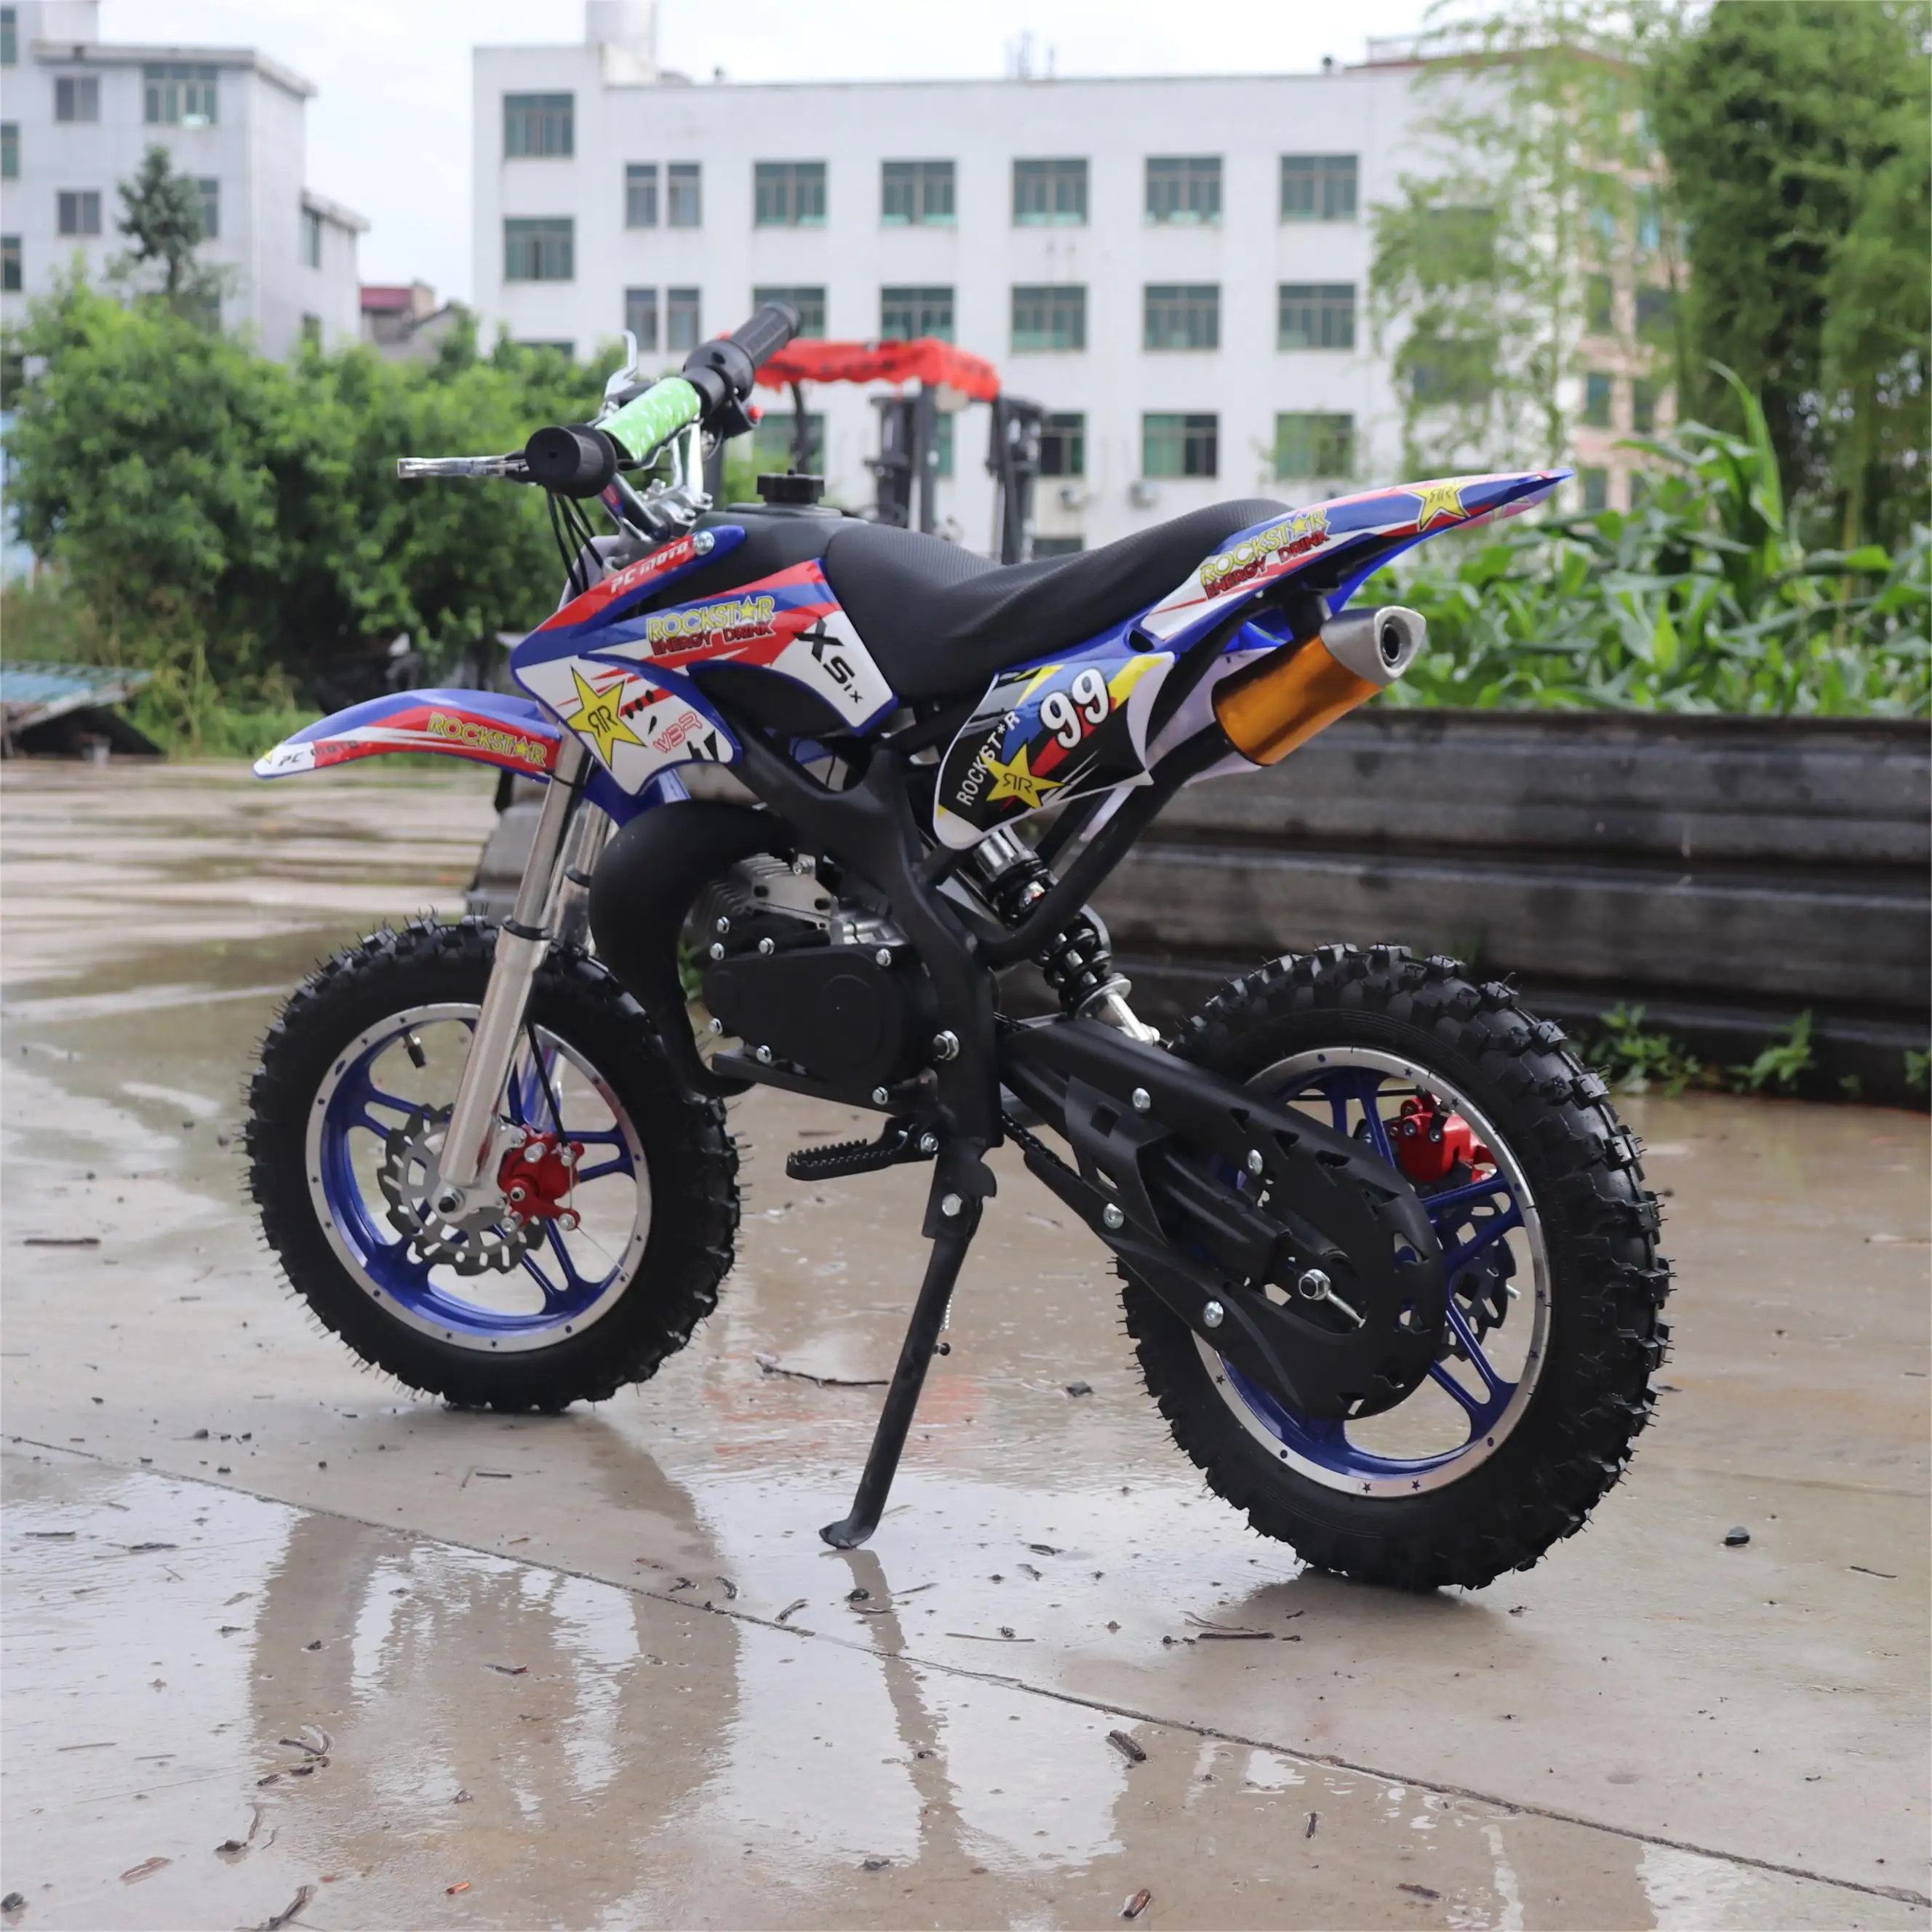 High Quality 49cc Mini Dirt Bikes Manual Ignition 2-Stroke Engine Automatic Chopper Type for Sale at a Cheap Price